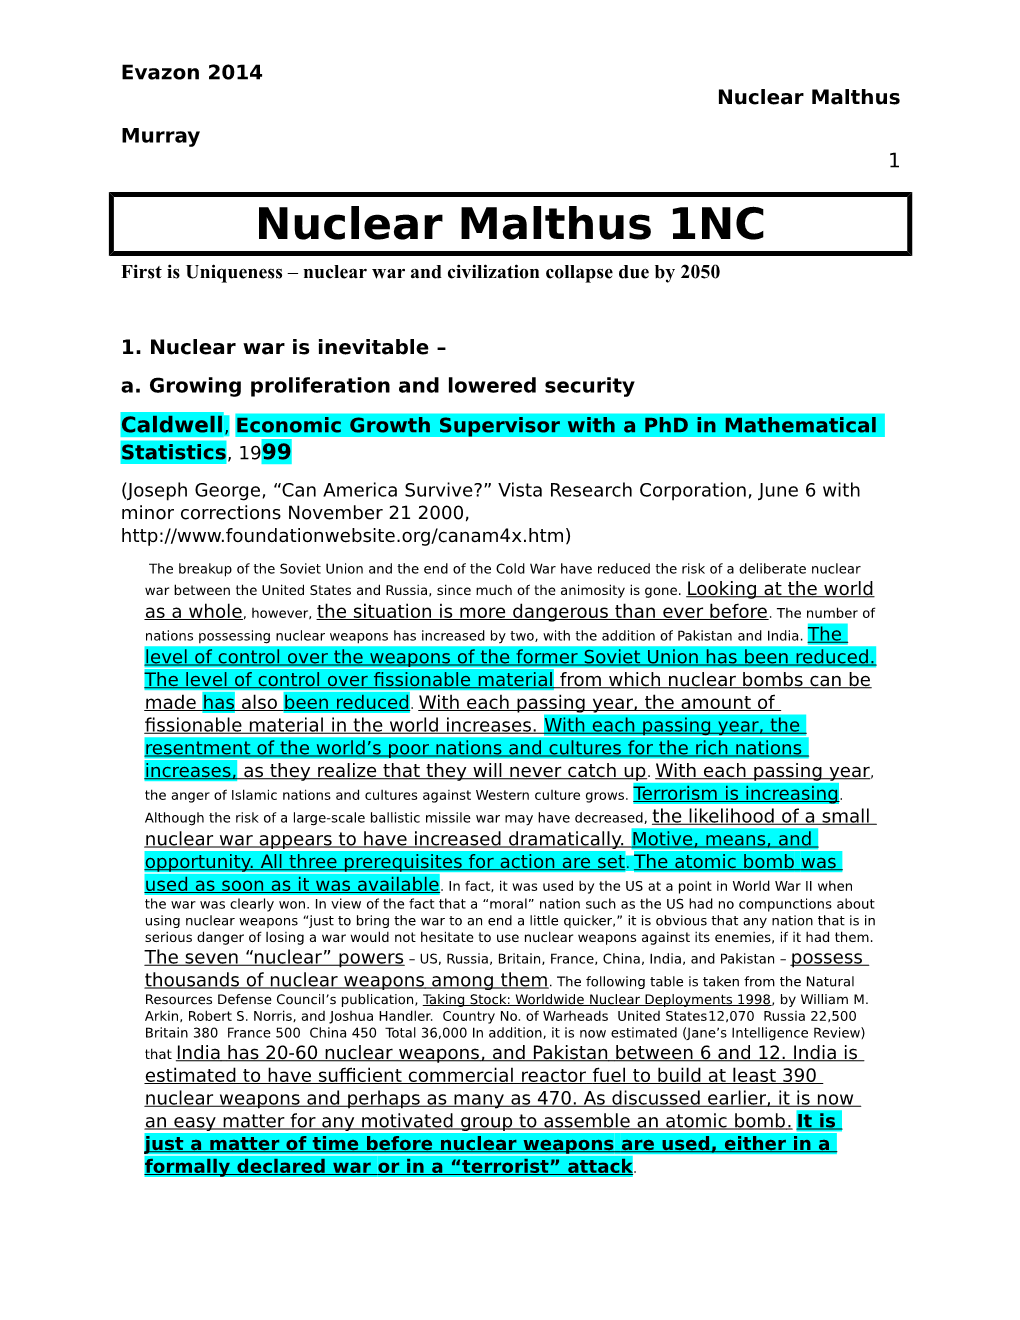 Nuclear Malthus Murray 1 Nuclear Malthus 1NC First Is Uniqueness – Nuclear War and Civilization Collapse Due by 2050